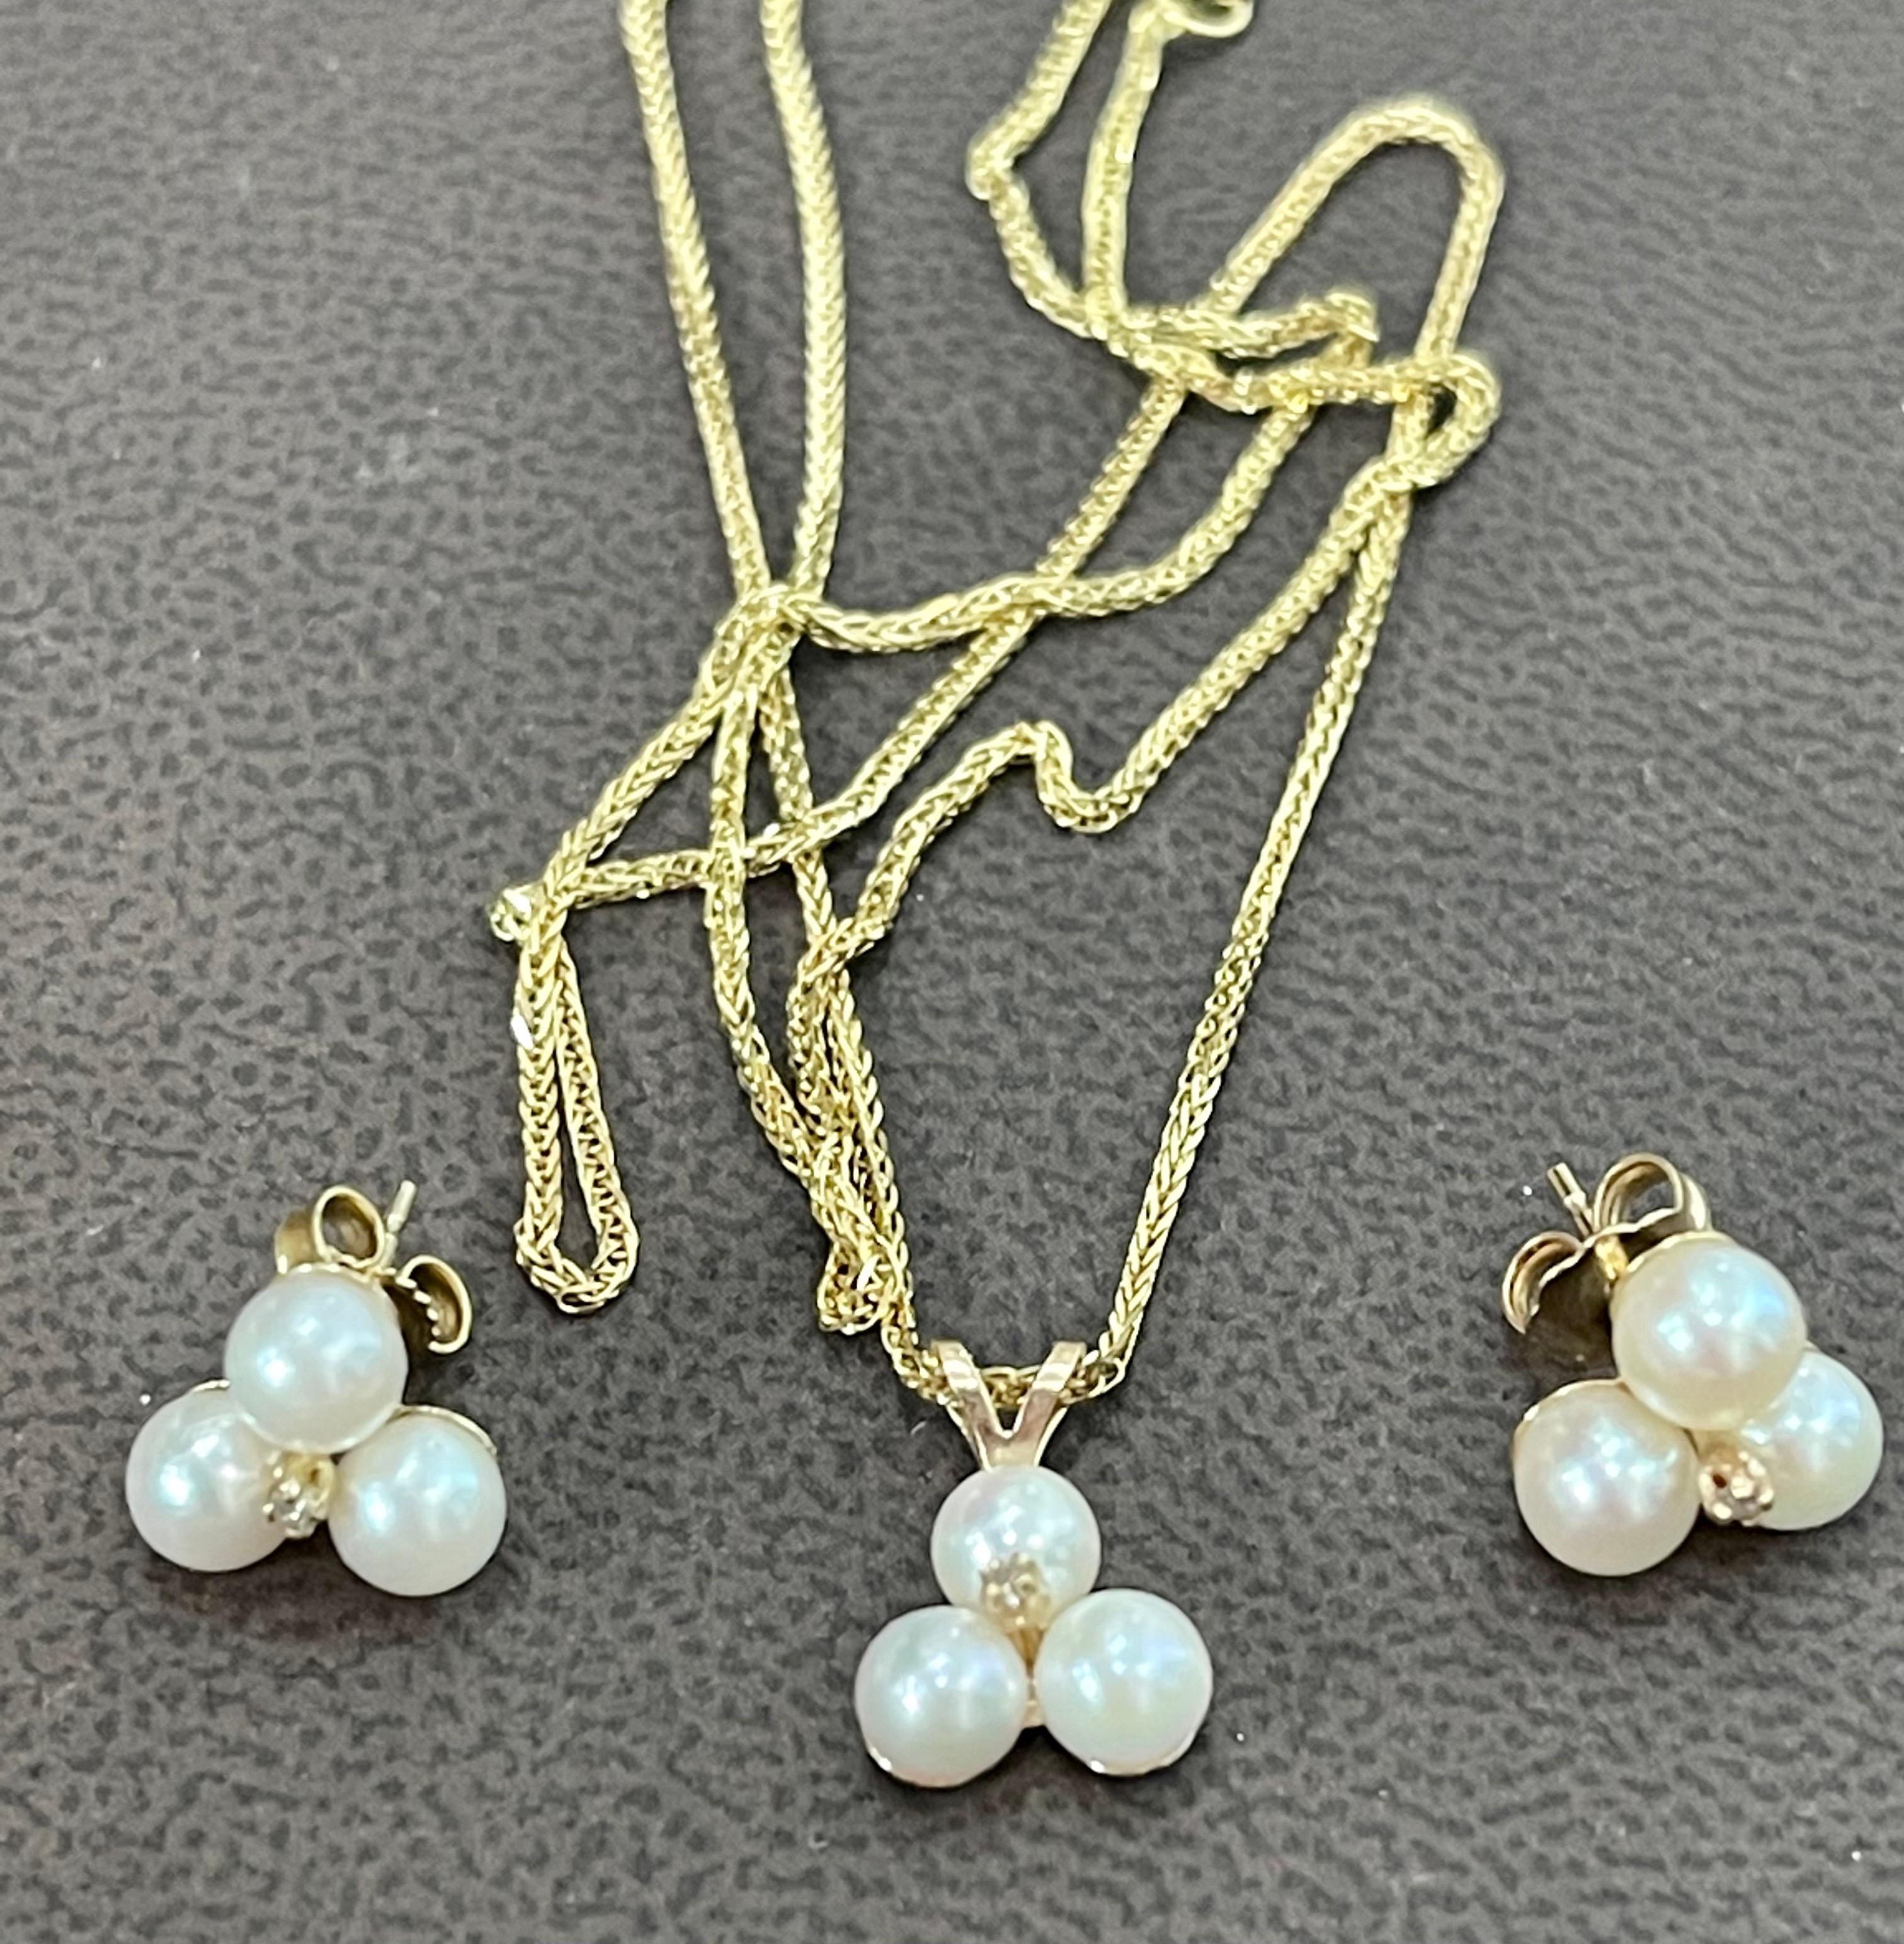 Tripod Pearl Earring with Matching Pendant & 14 Karat Yellow Gold Chain Set
This spectacular Pendant Necklace and earring set is  consisting of pendant with three small pearl and a very tiny diamond in the middle. Diamond is minuscule . It has